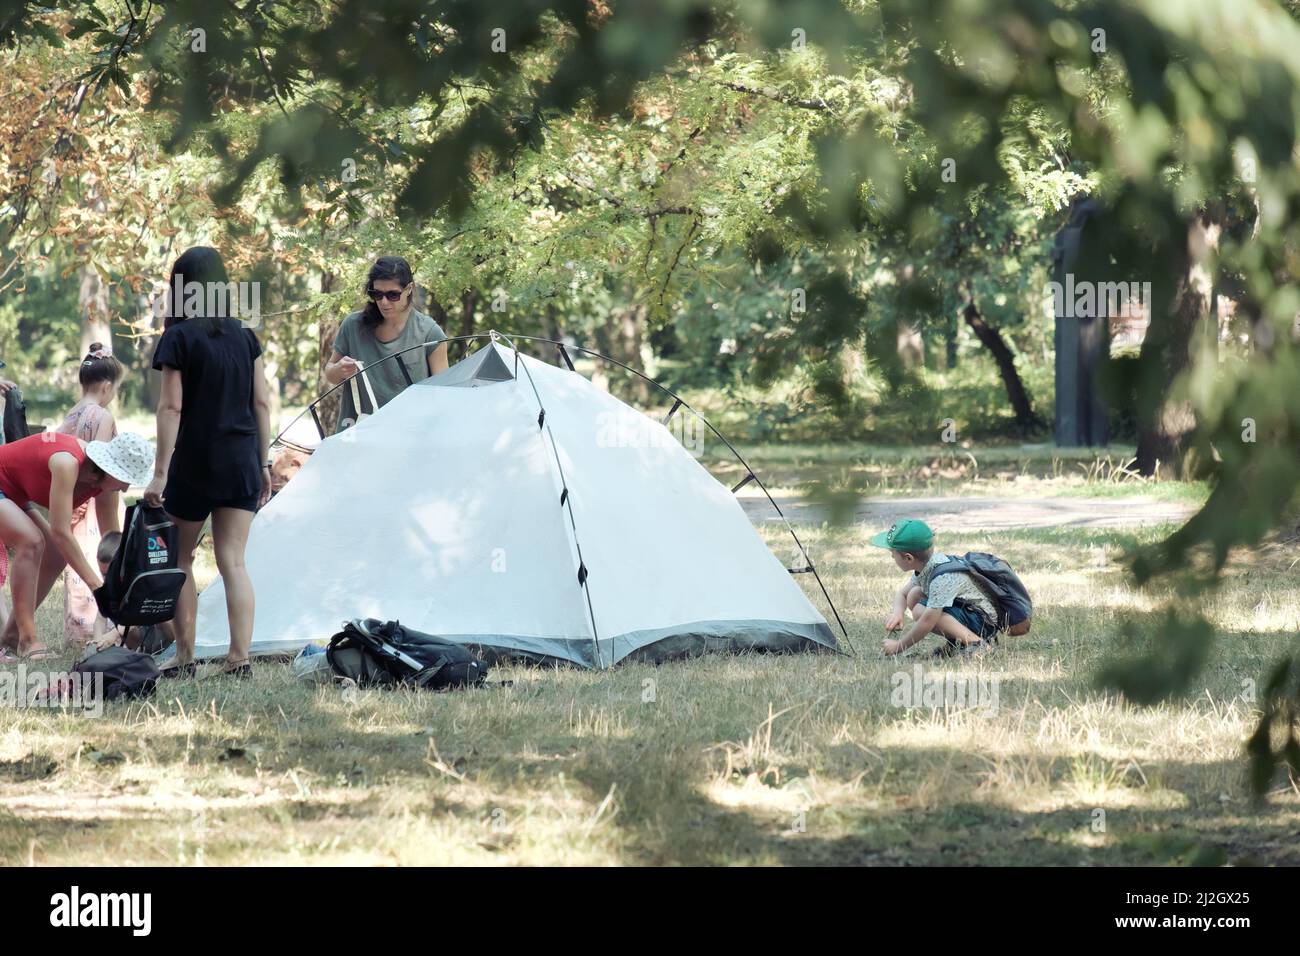 SOFIA, BULGARIA - AUGUST 04, 2017: women teaching to children how to pitch a tent in a Sofia Park Stock Photo